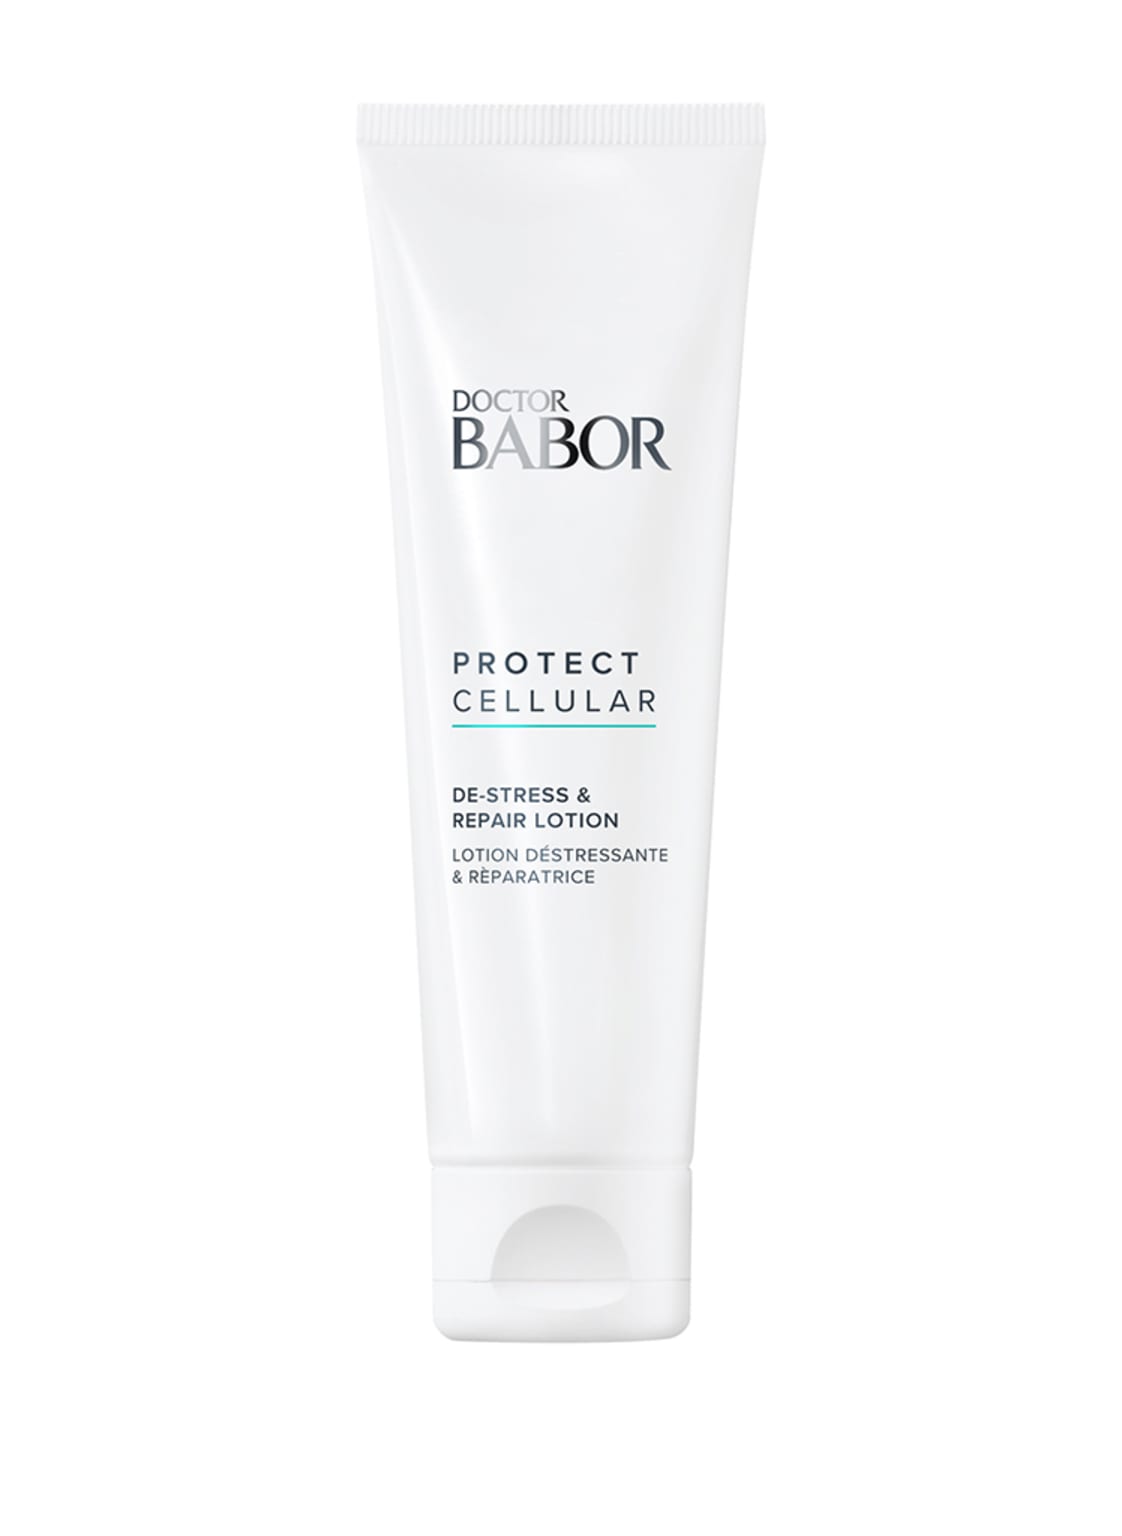 Image of Babor Protect Cellular De-Stress & Repair Lotion 150 ml